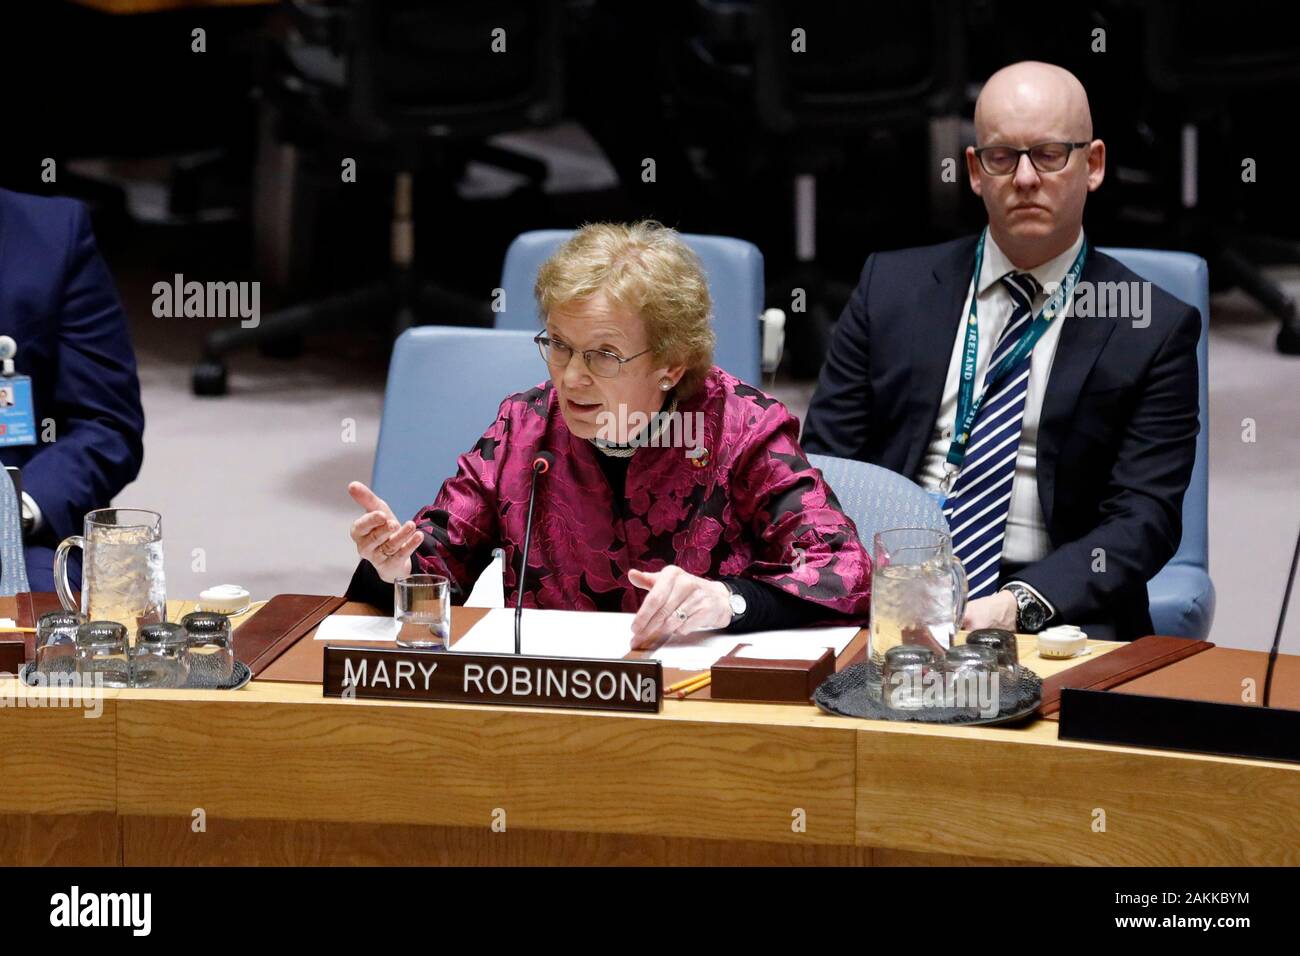 (200109) -- UNITED NATIONS, Jan. 9, 2020 (Xinhua) -- Mary Robinson, Chair of The Elders, addresses a Security Council open debate on the topic of 'maintenance of international peace and security upholding the UN Charter' at the UN headquarters in New York, on Jan. 9, 2020. The United Nations Security Council on Thursday adopted a presidential statement urging all member states to fully comply with the UN Charter while recognizing the critical importance of the Charter to the maintenance of international peace and security. (Xinhua/Li Muzi) Stock Photo